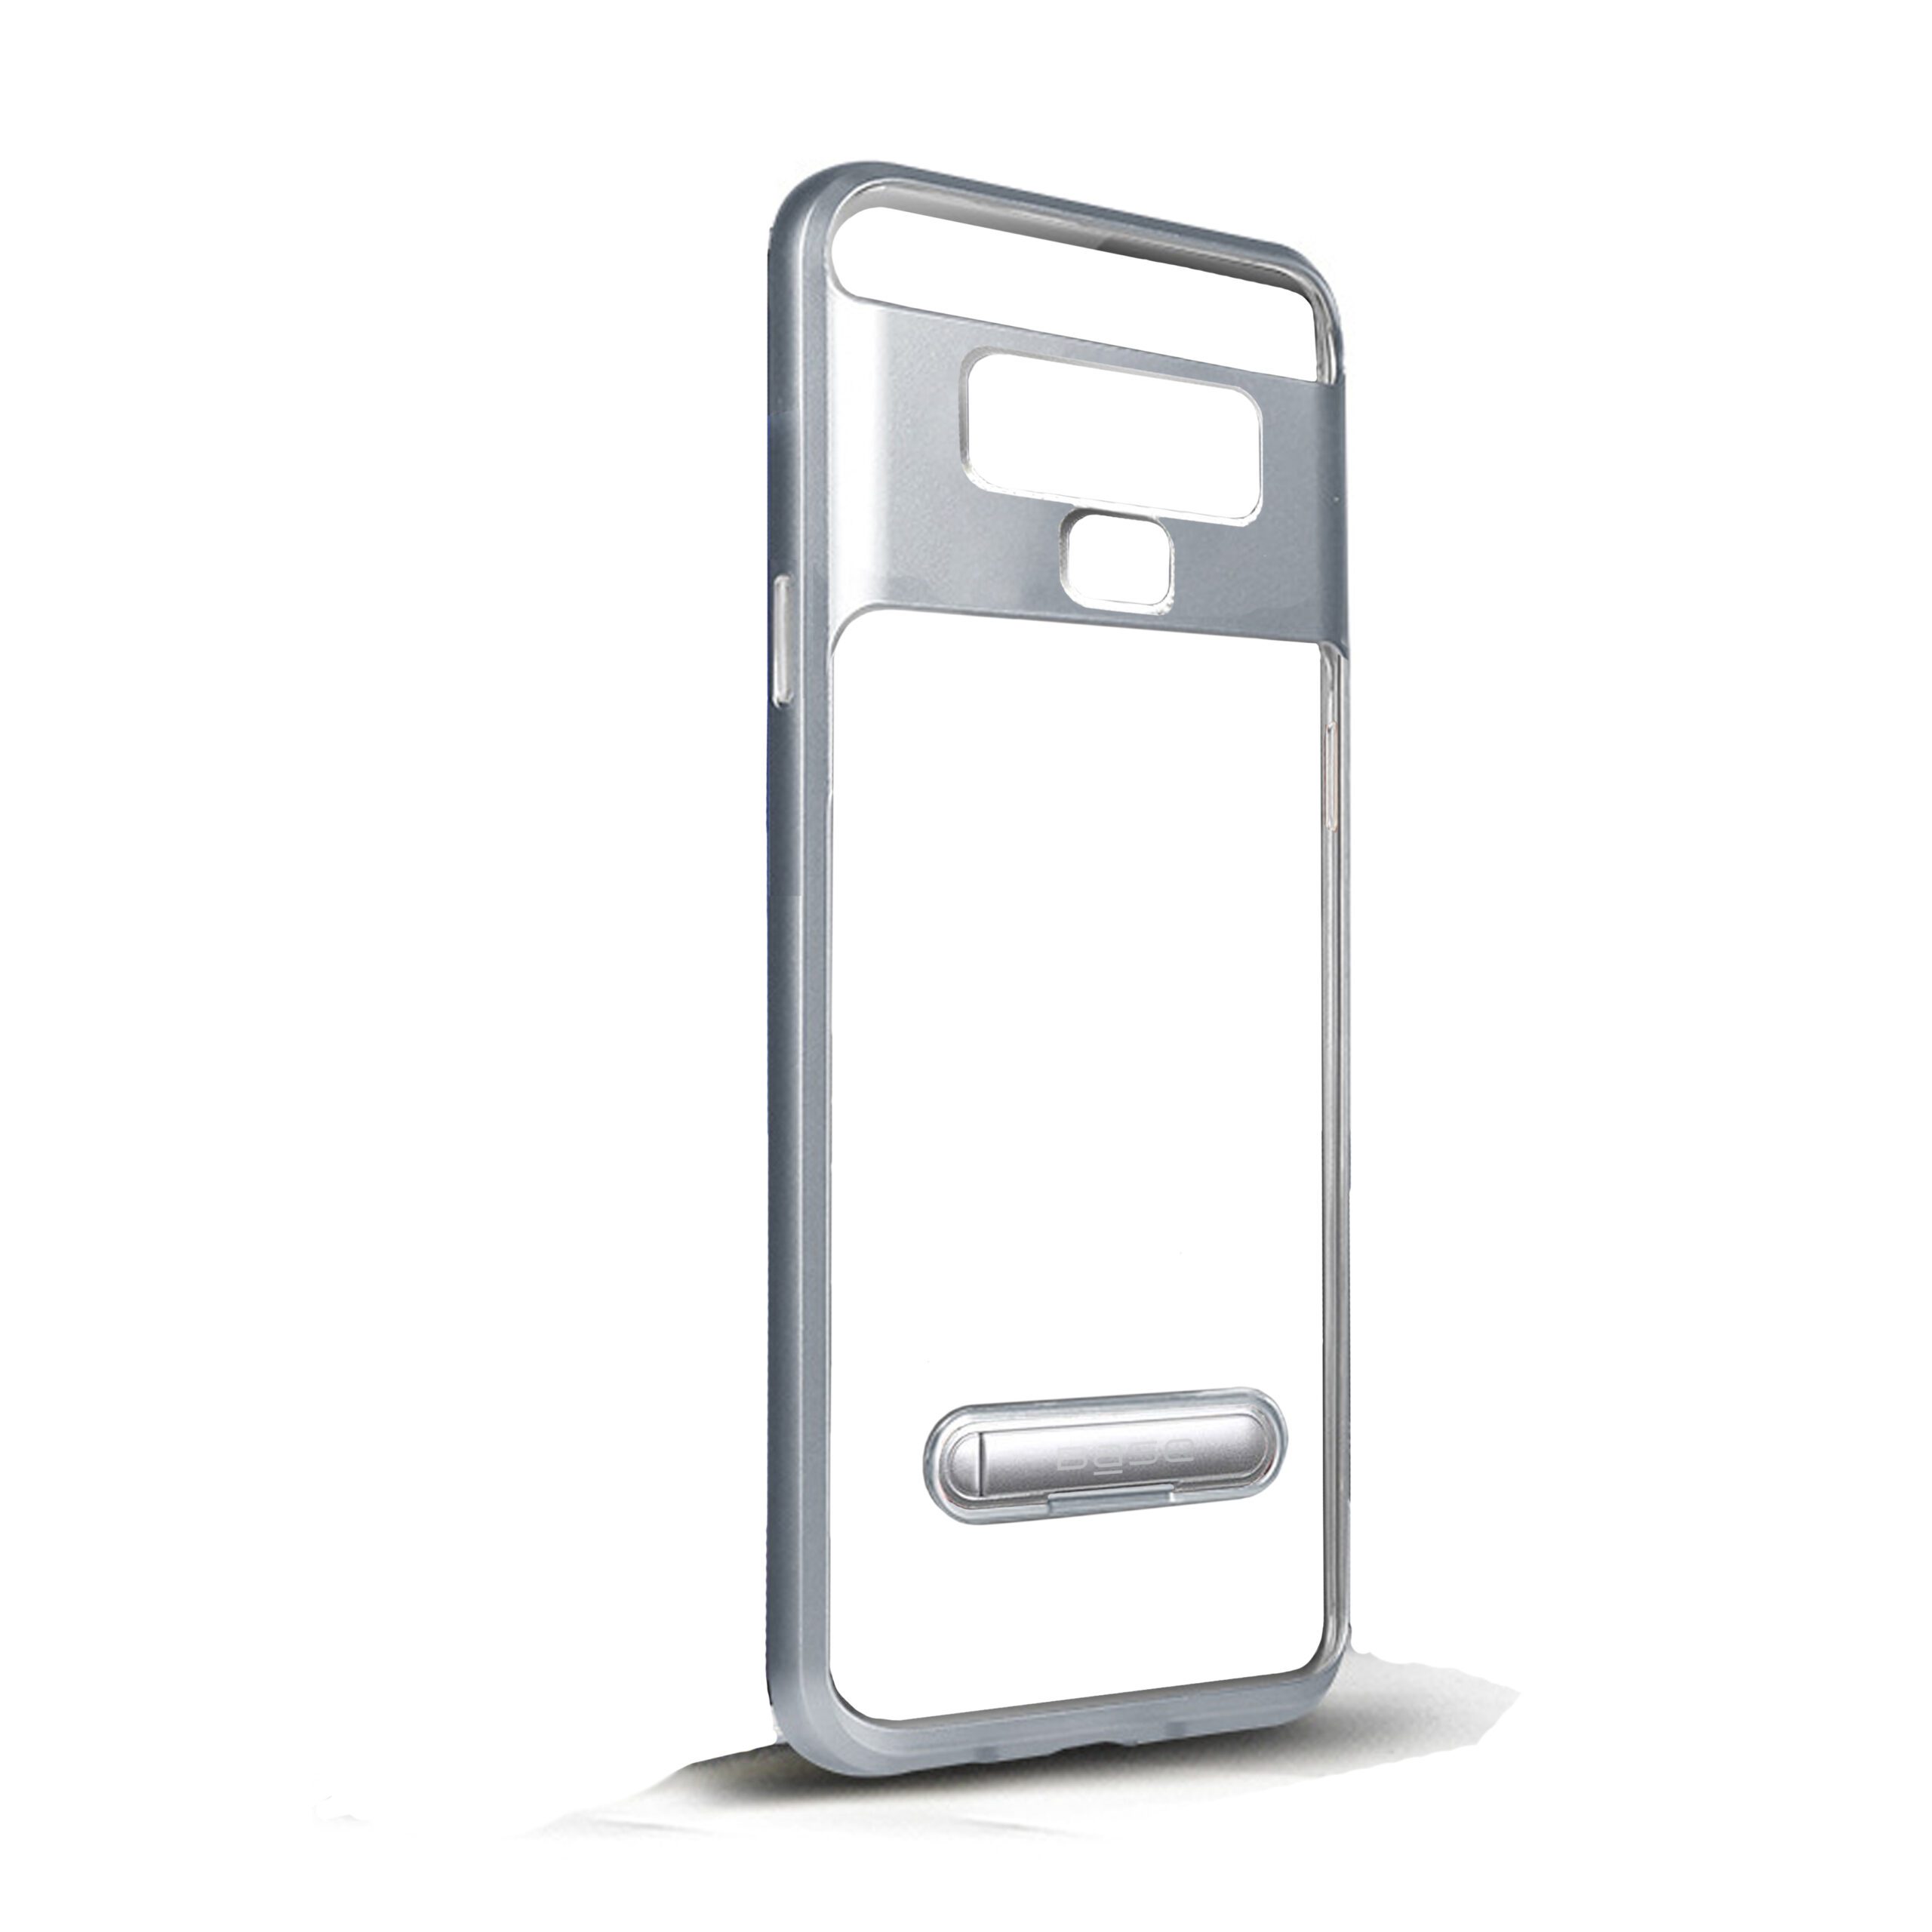 Base DuoHybrid - Reinforced  Protective Case w/ Kickstand for Samsung Note9 - Clear/Silver